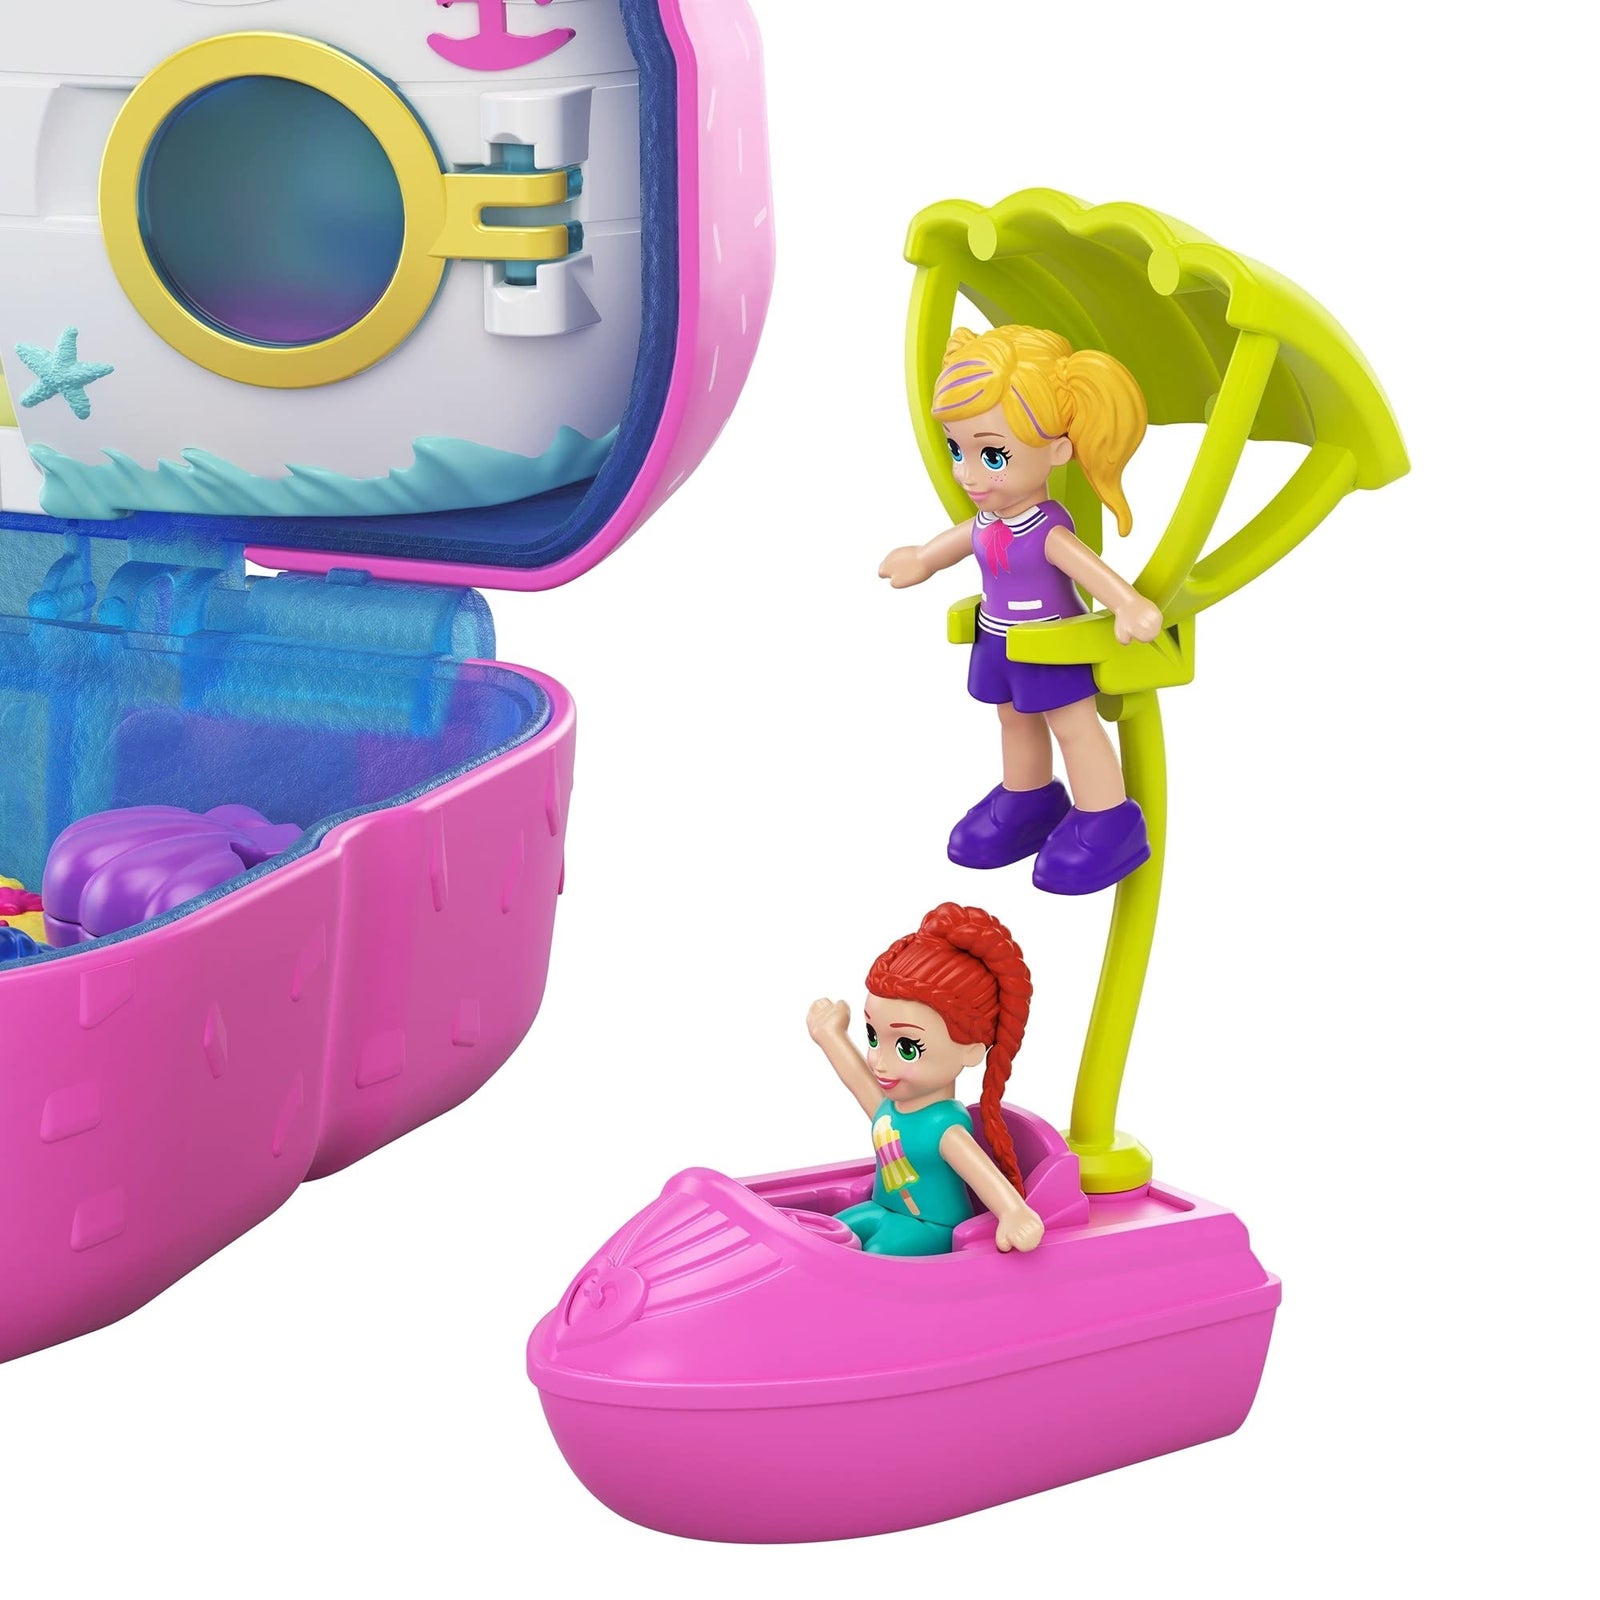 Polly Pocket Pocket World Sweet Sails Cruise Ship Compact with Fun Reveals, Micro Polly and Lila Dolls and Jet Ski Accessory, for Ages 4 and Up [Amazon Exclusive]